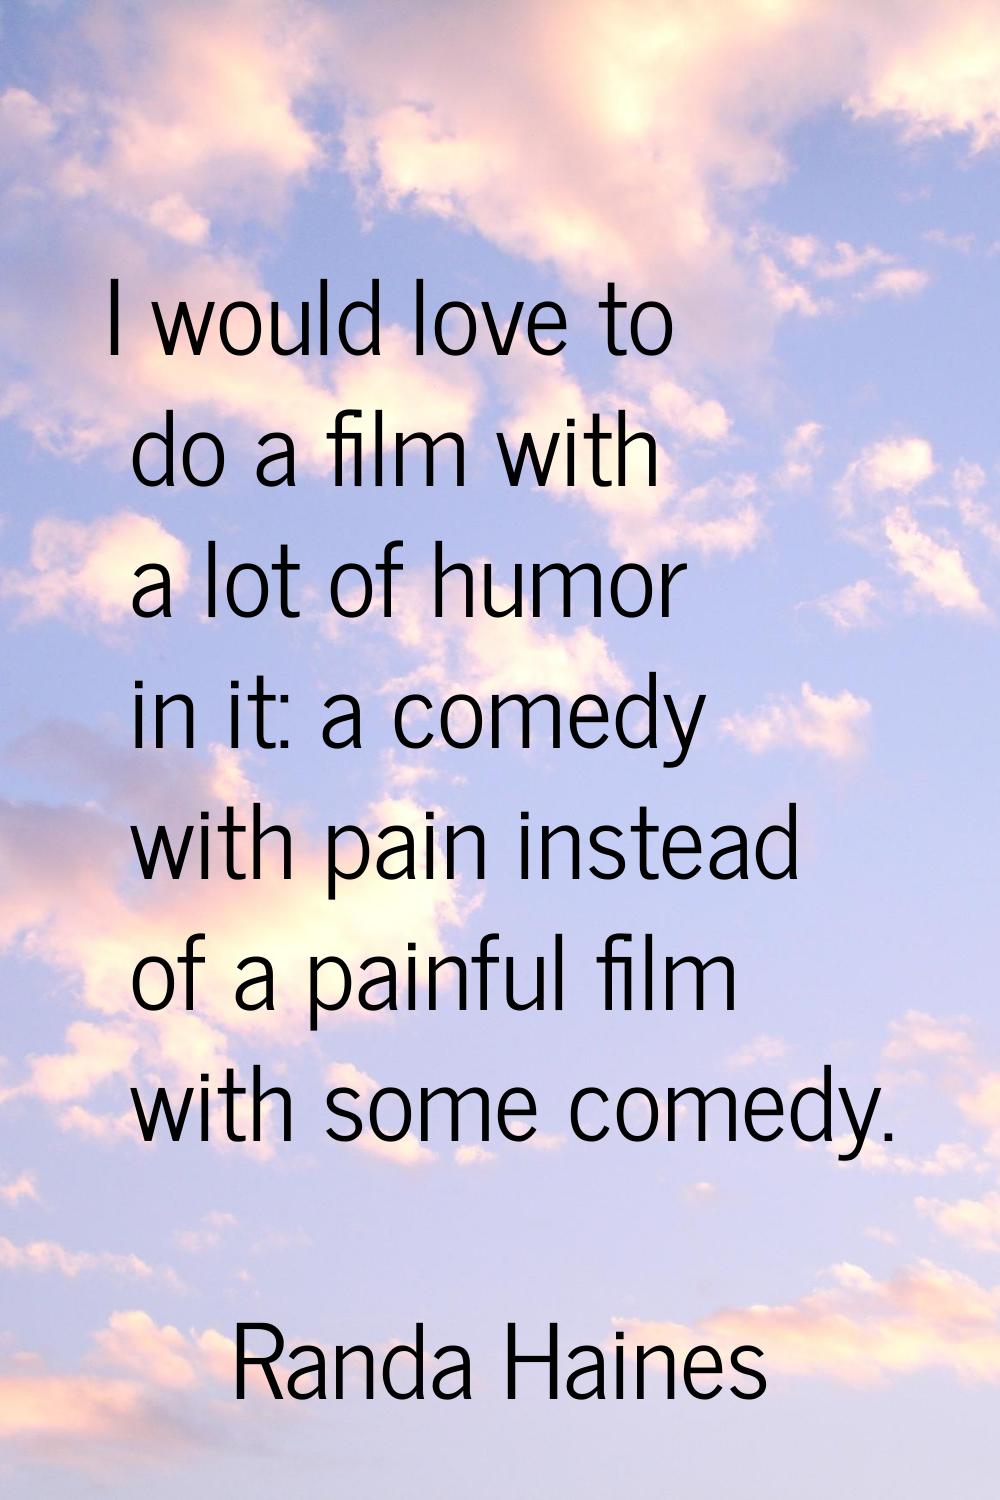 I would love to do a film with a lot of humor in it: a comedy with pain instead of a painful film w